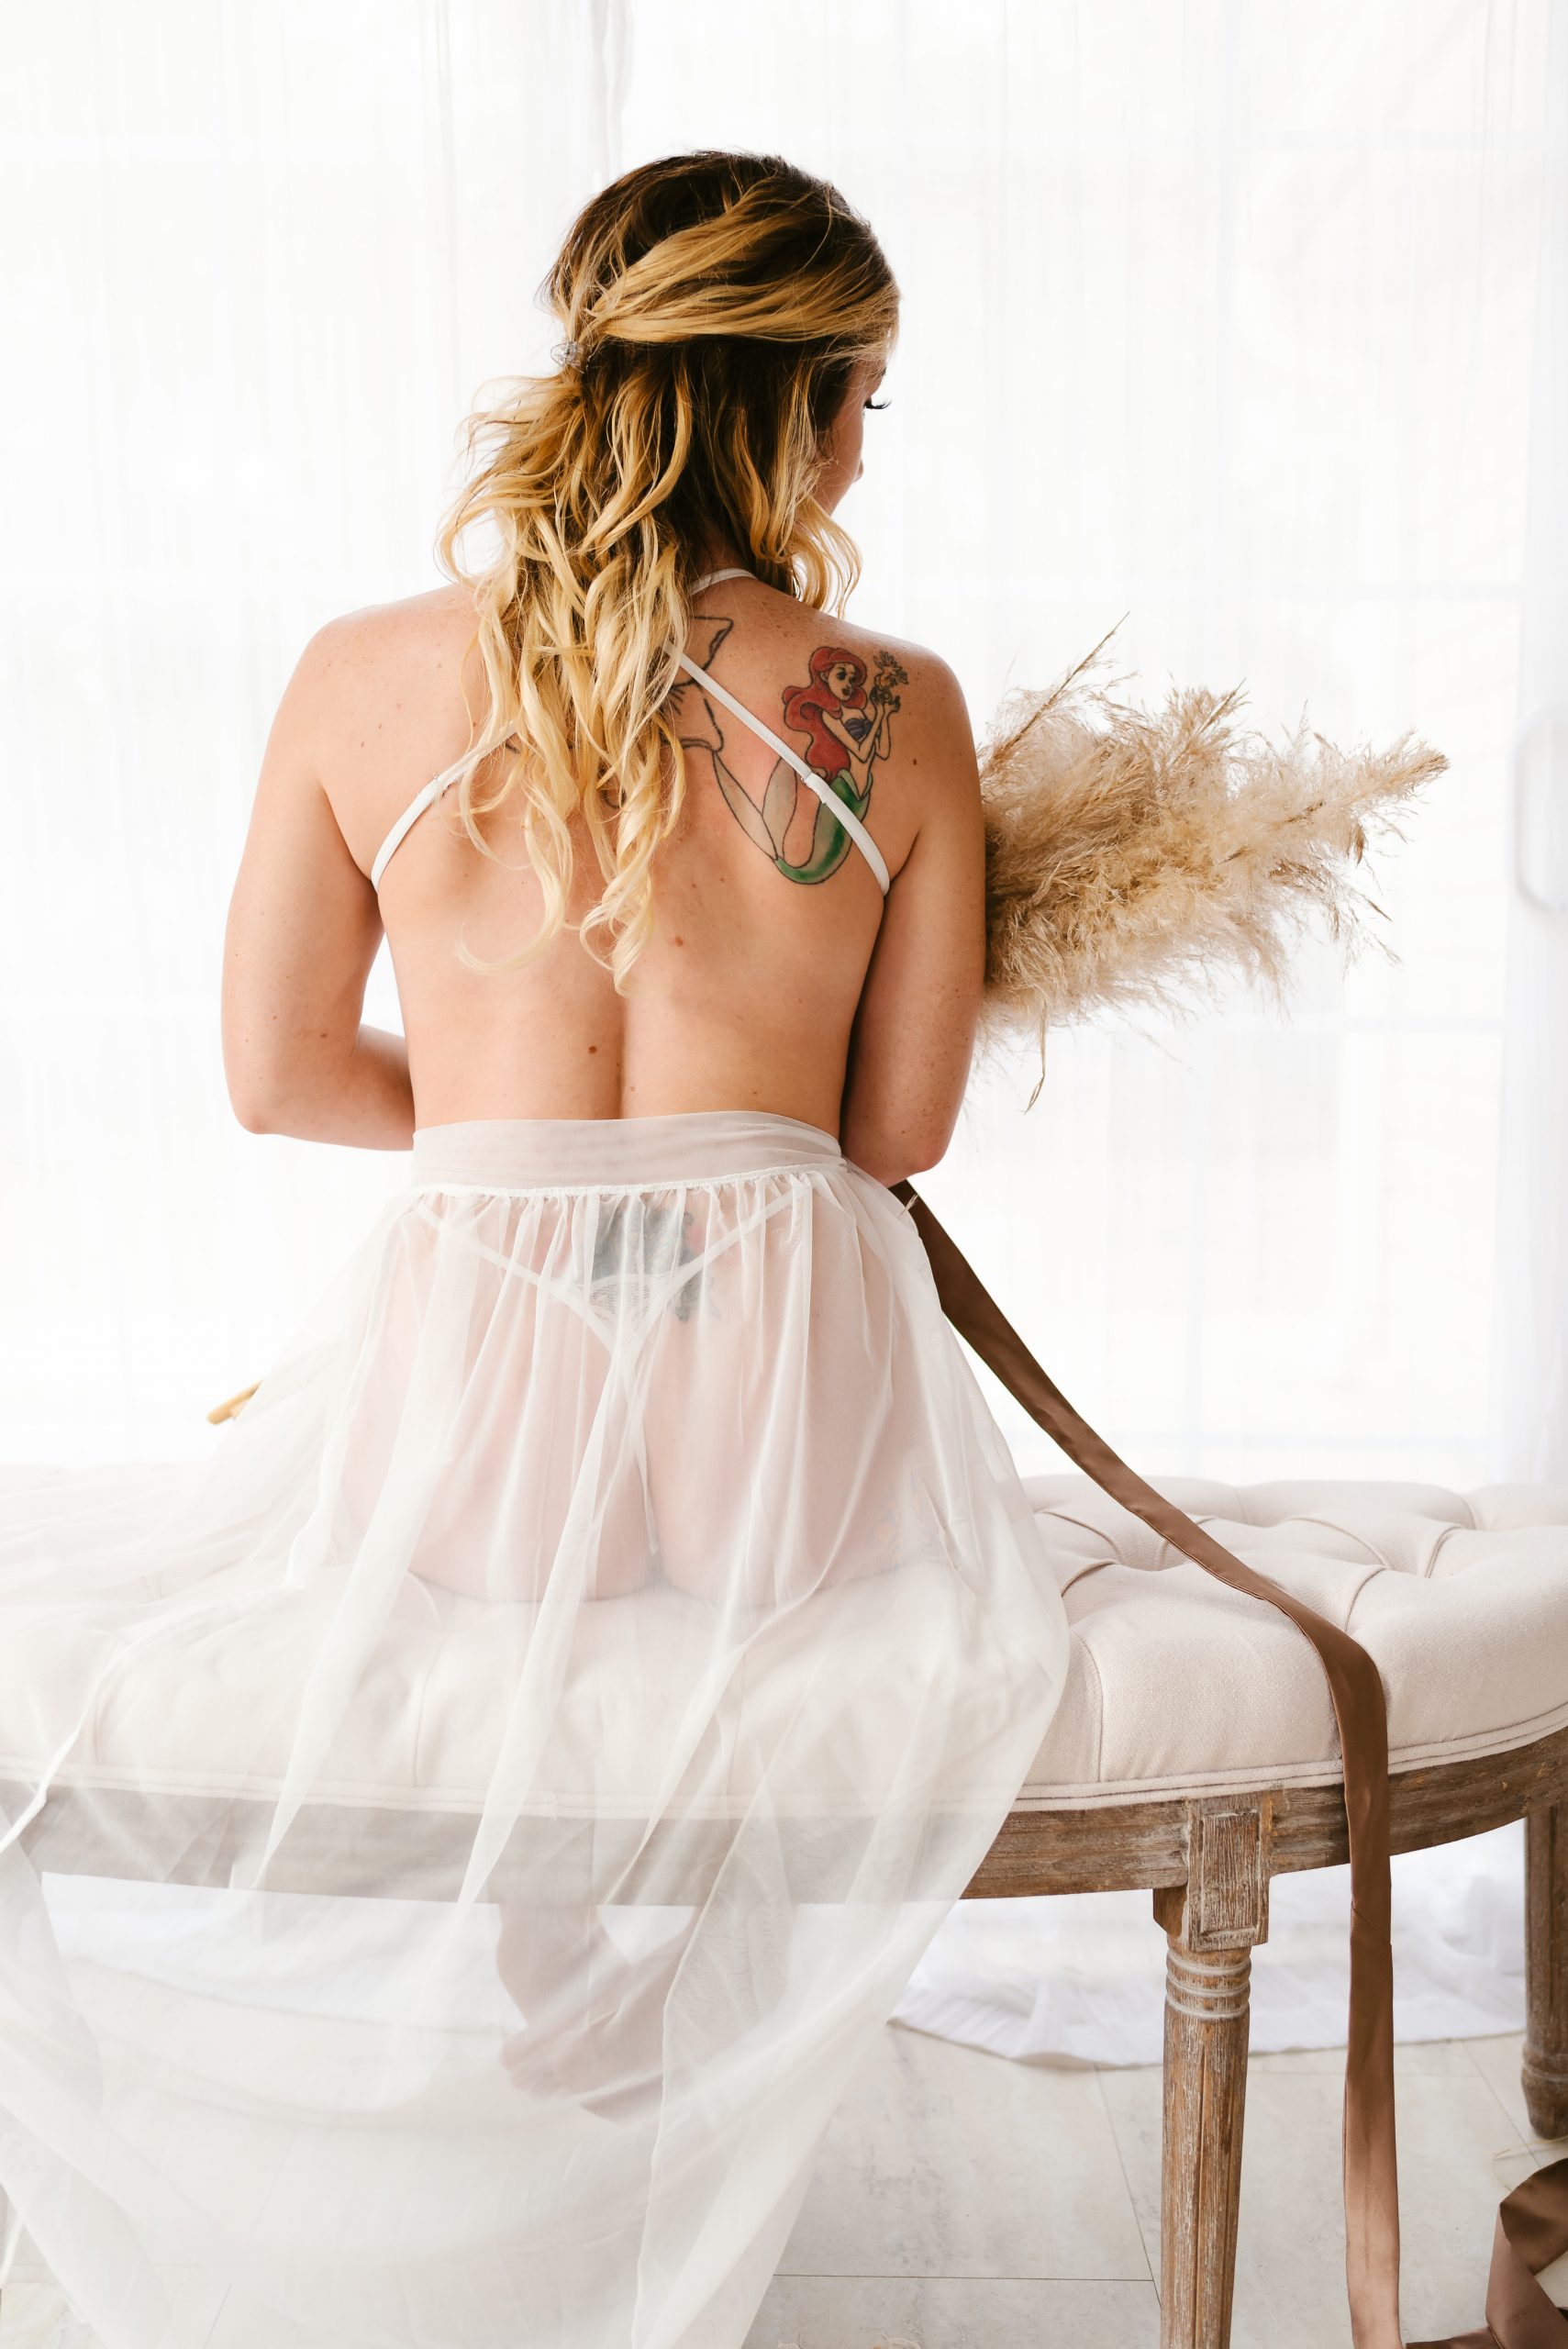 woman sitting on bench with pampas grass posing for boudoir photo